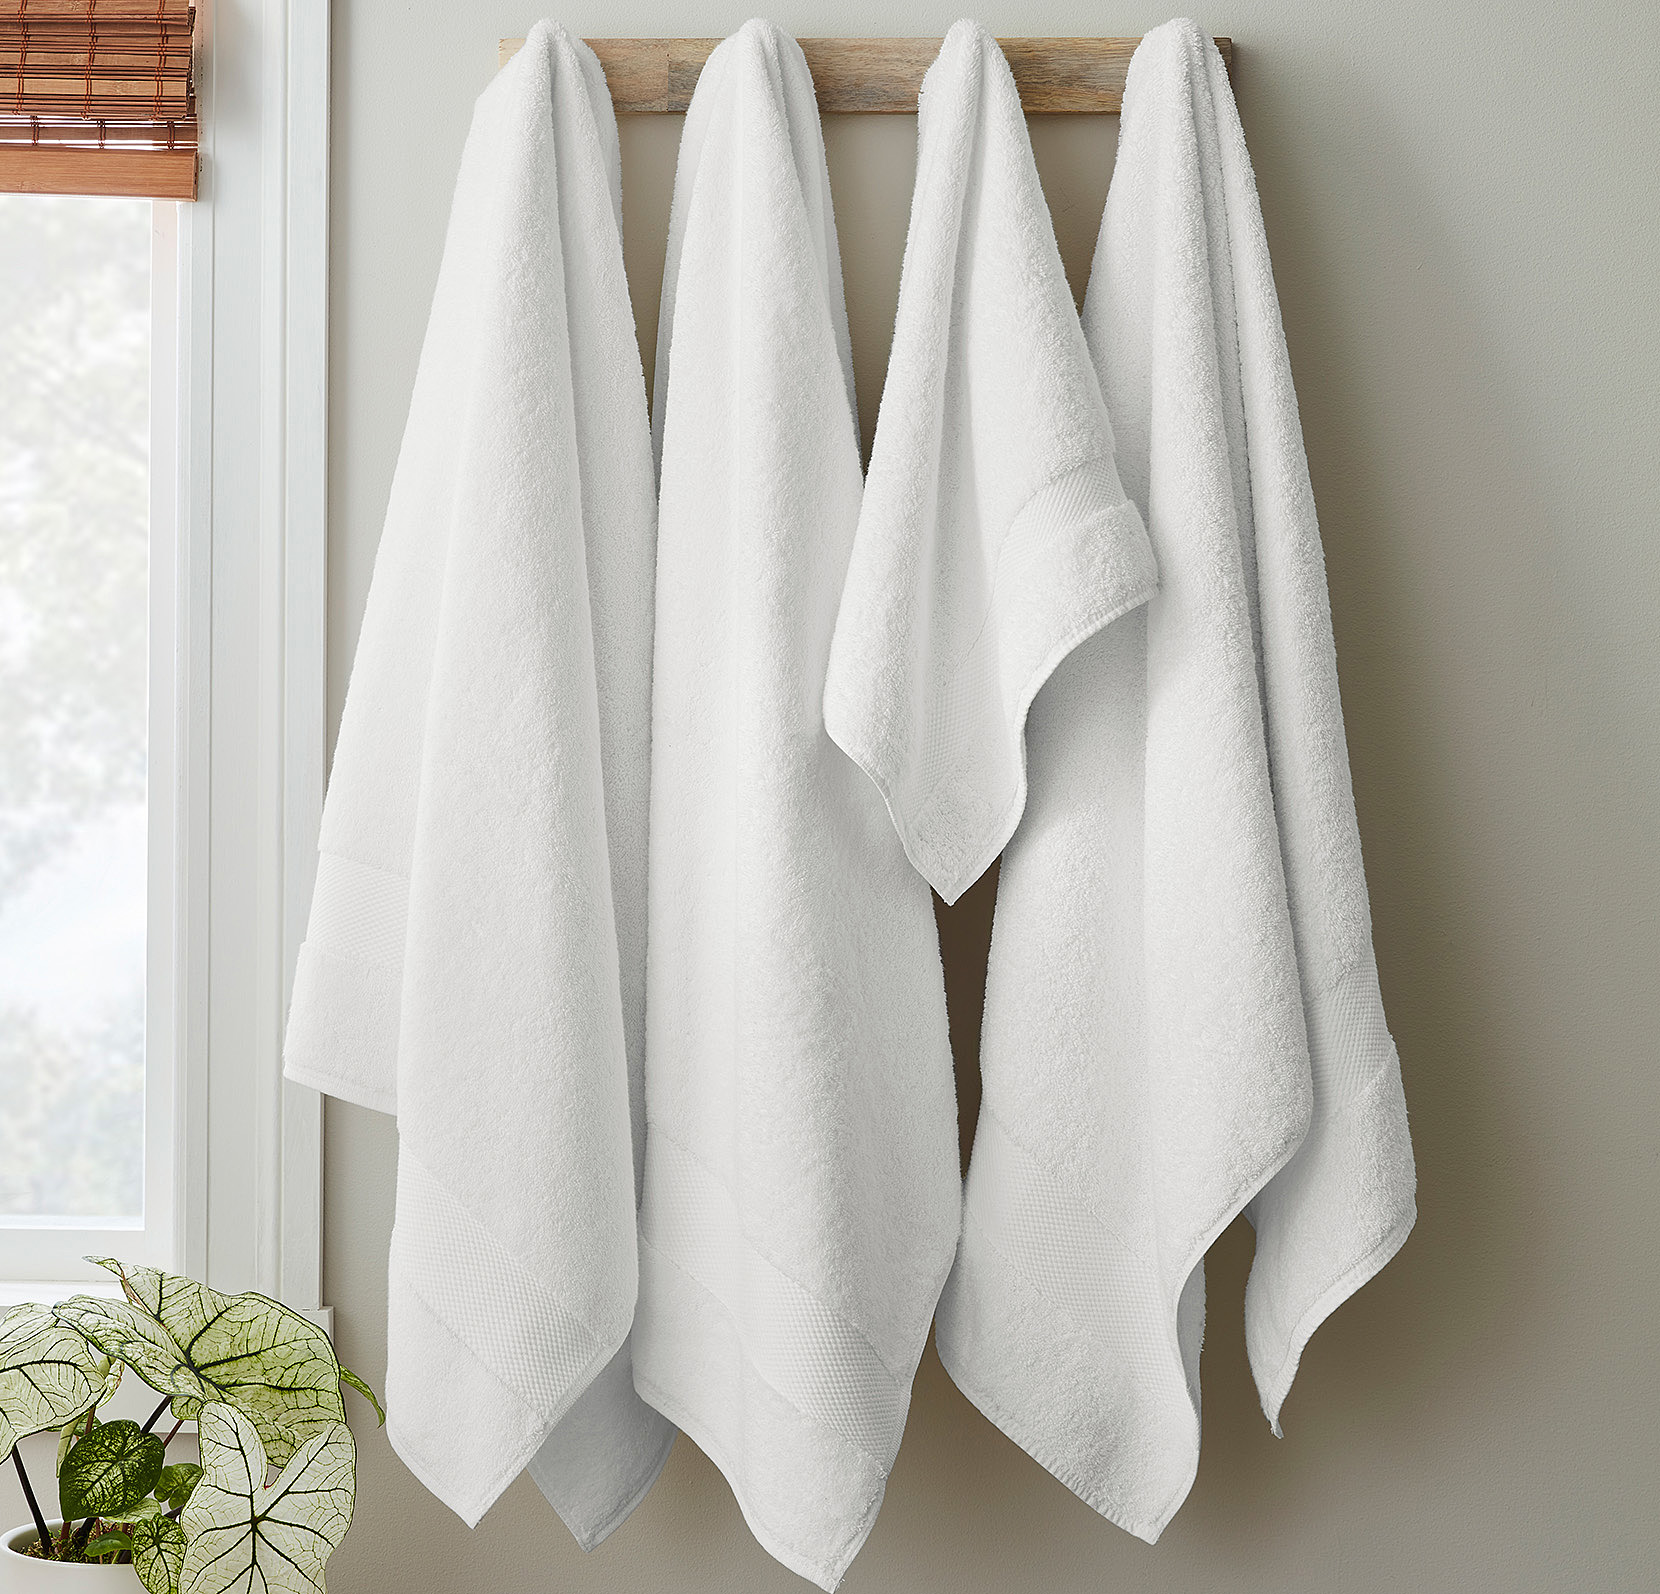 Boll & Branch towels hanging in bathroom